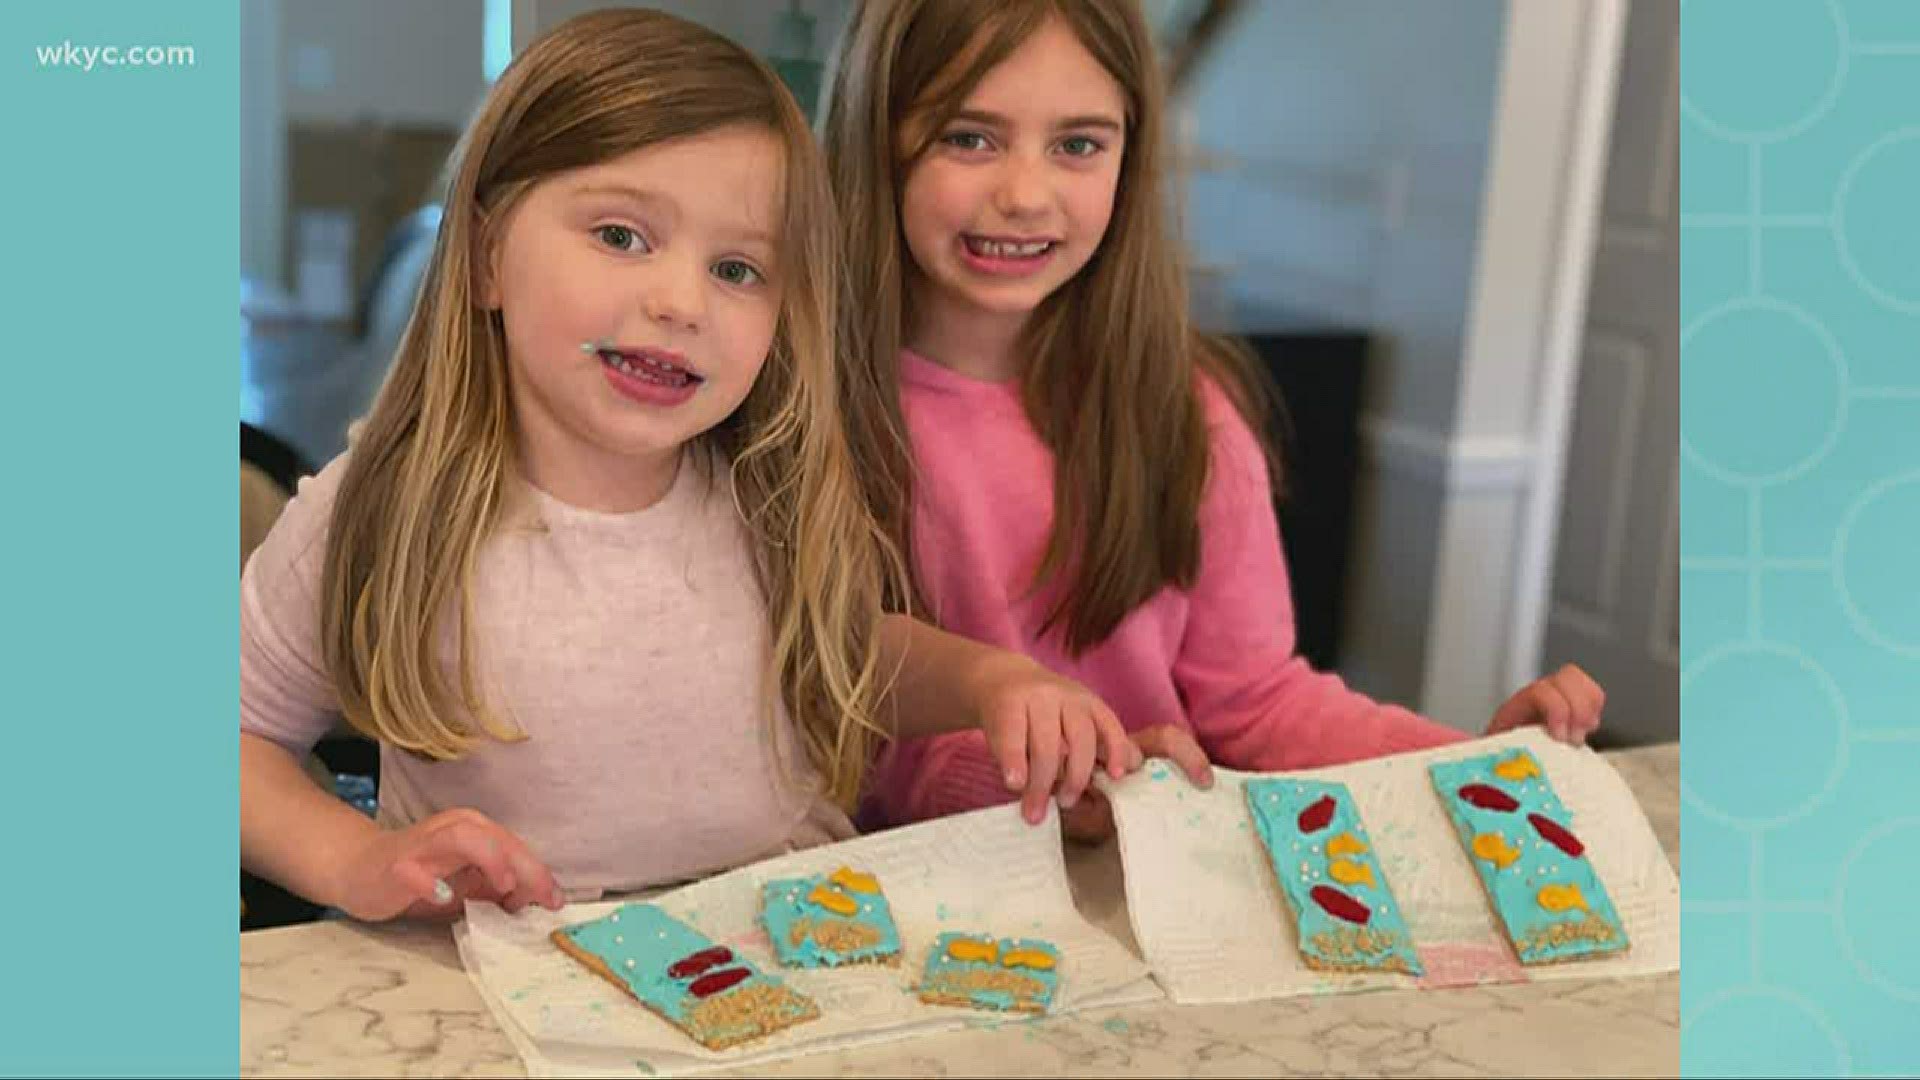 Kids constantly asking for snacks? Tell them to make their own! Maureen Kyle shows us how to keep them busy making 'Under the Sea' graham cracker cookies.